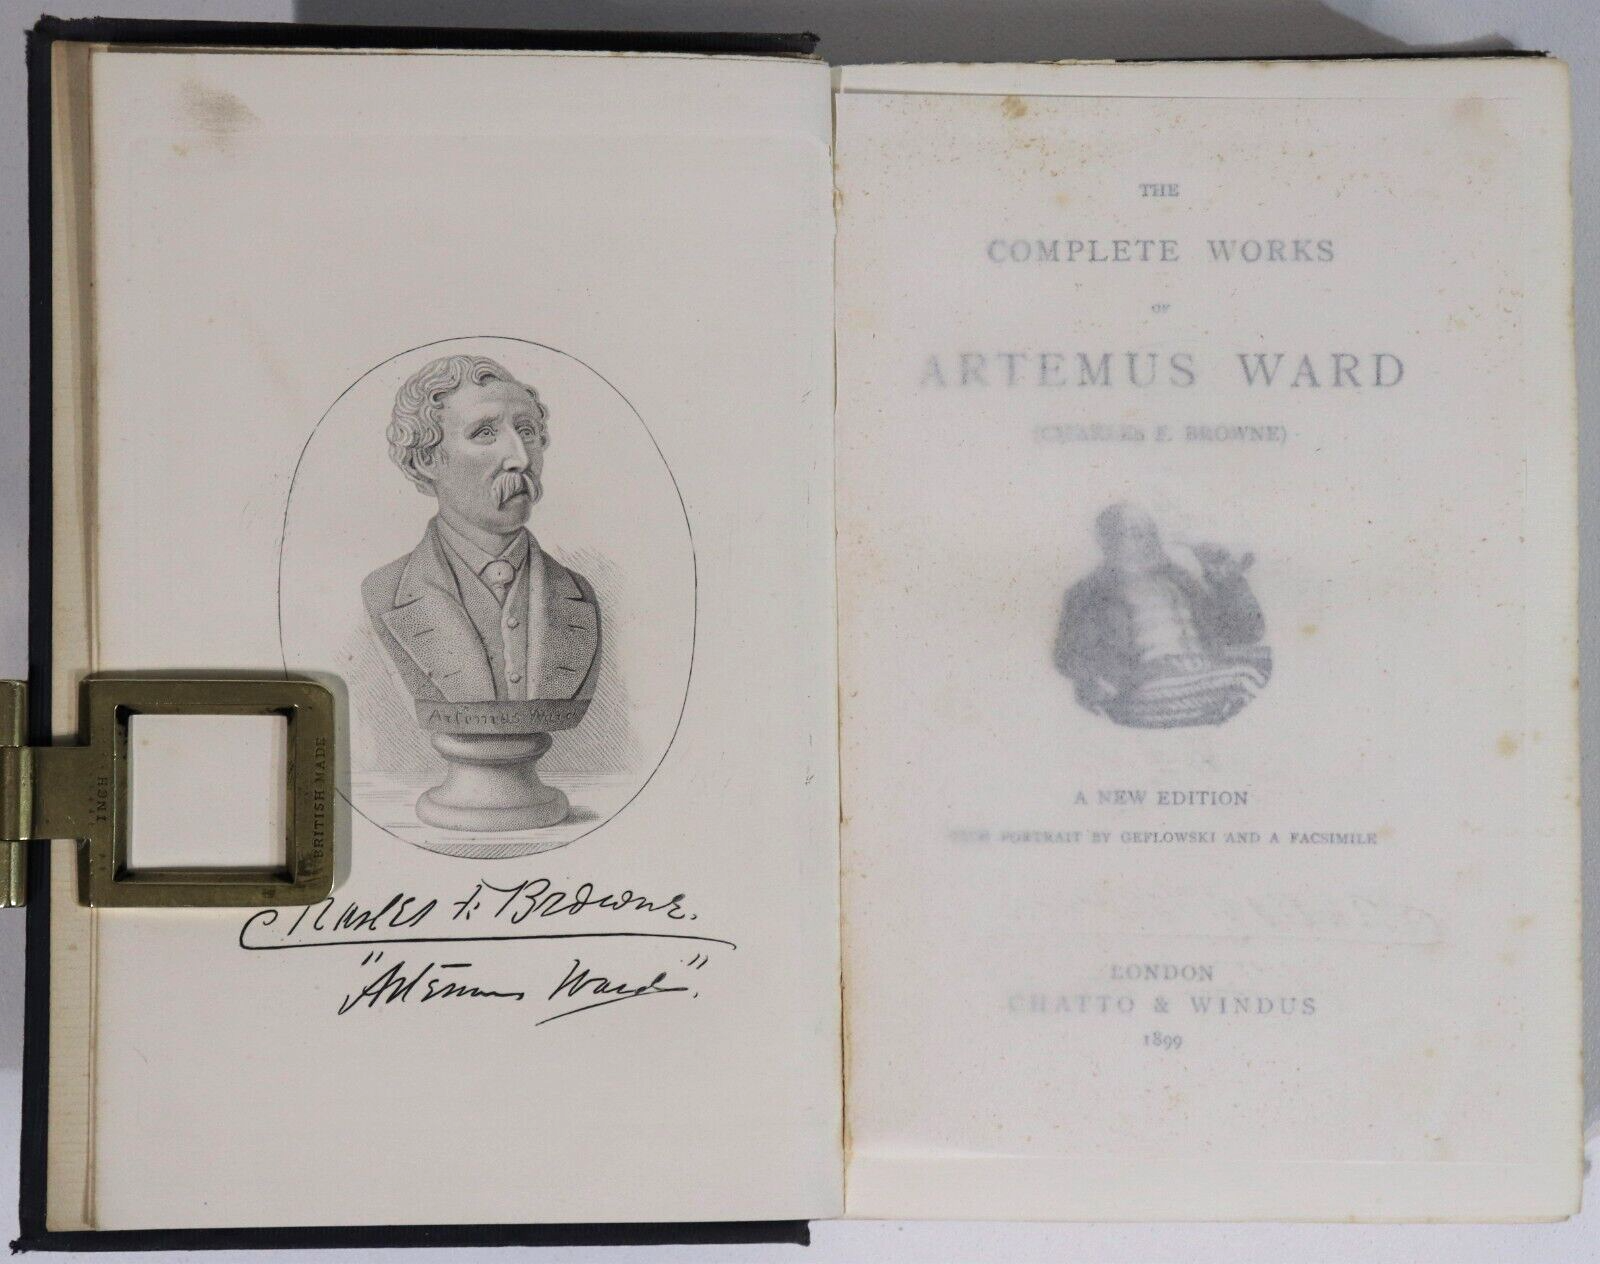 The Complete Works Of Artemus Ward - 1899 - Antique American History Book - 0